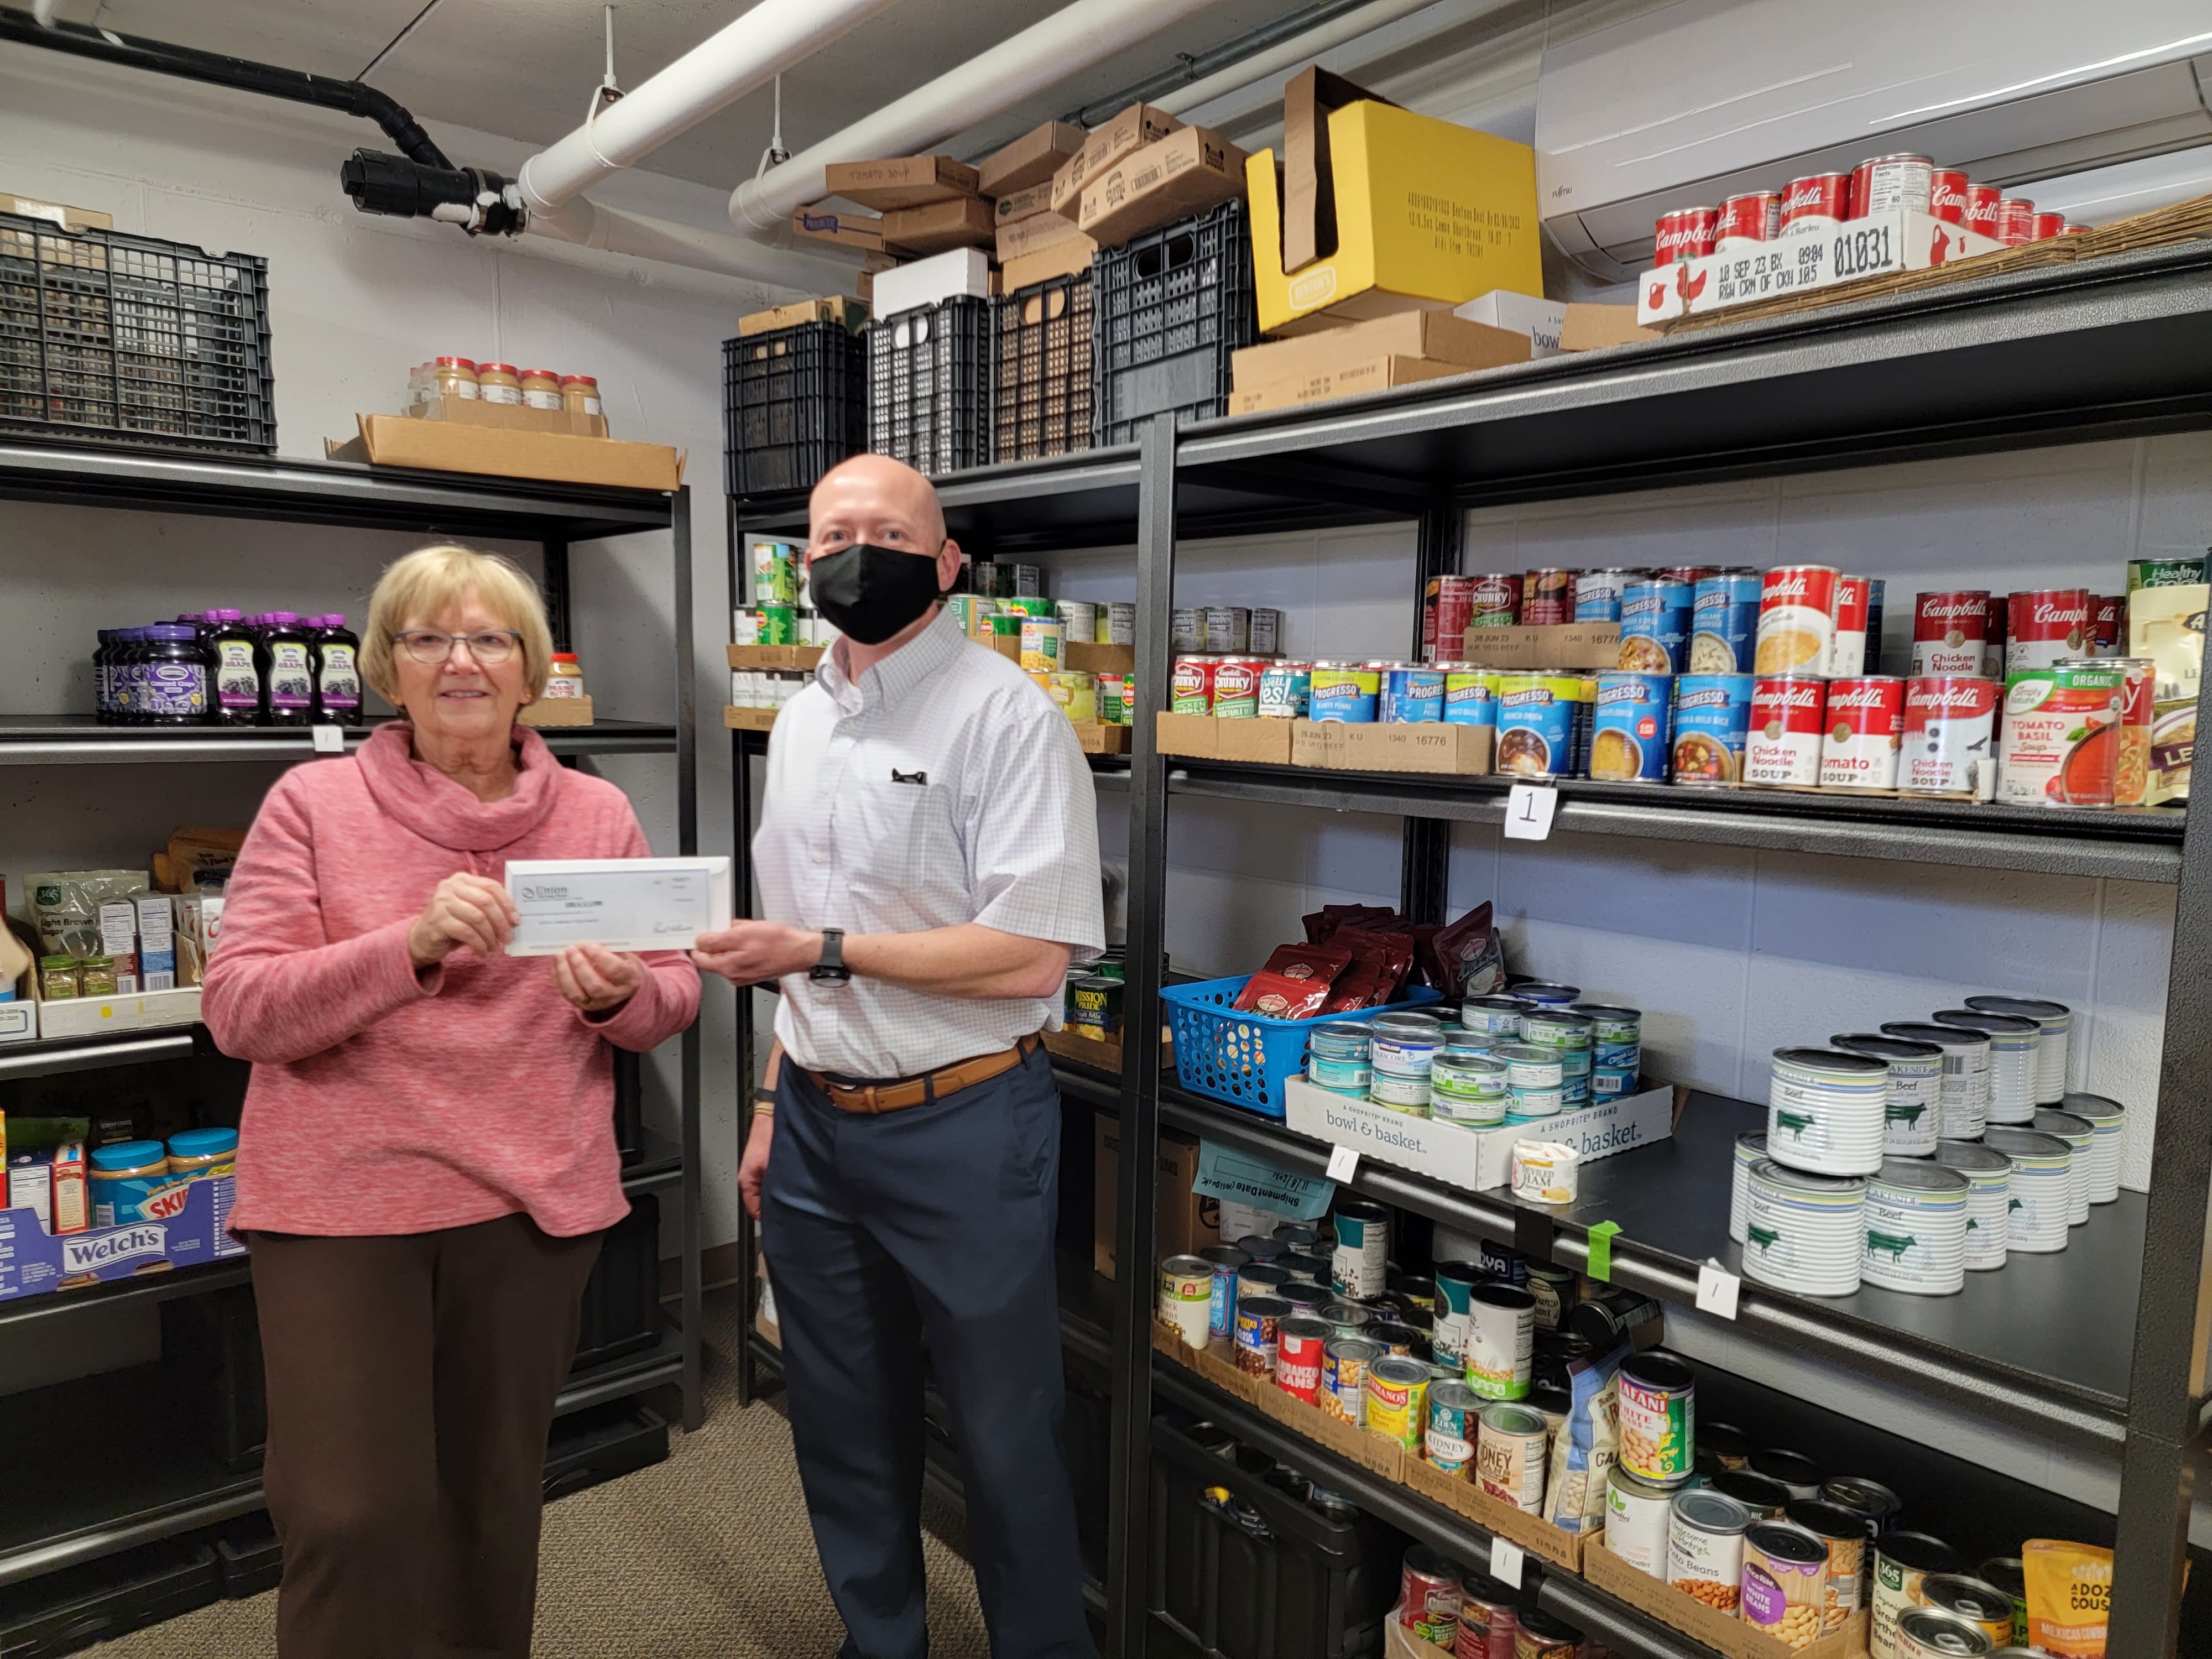 Bethel Community Food Pantry 122221 - More Causes We Care About